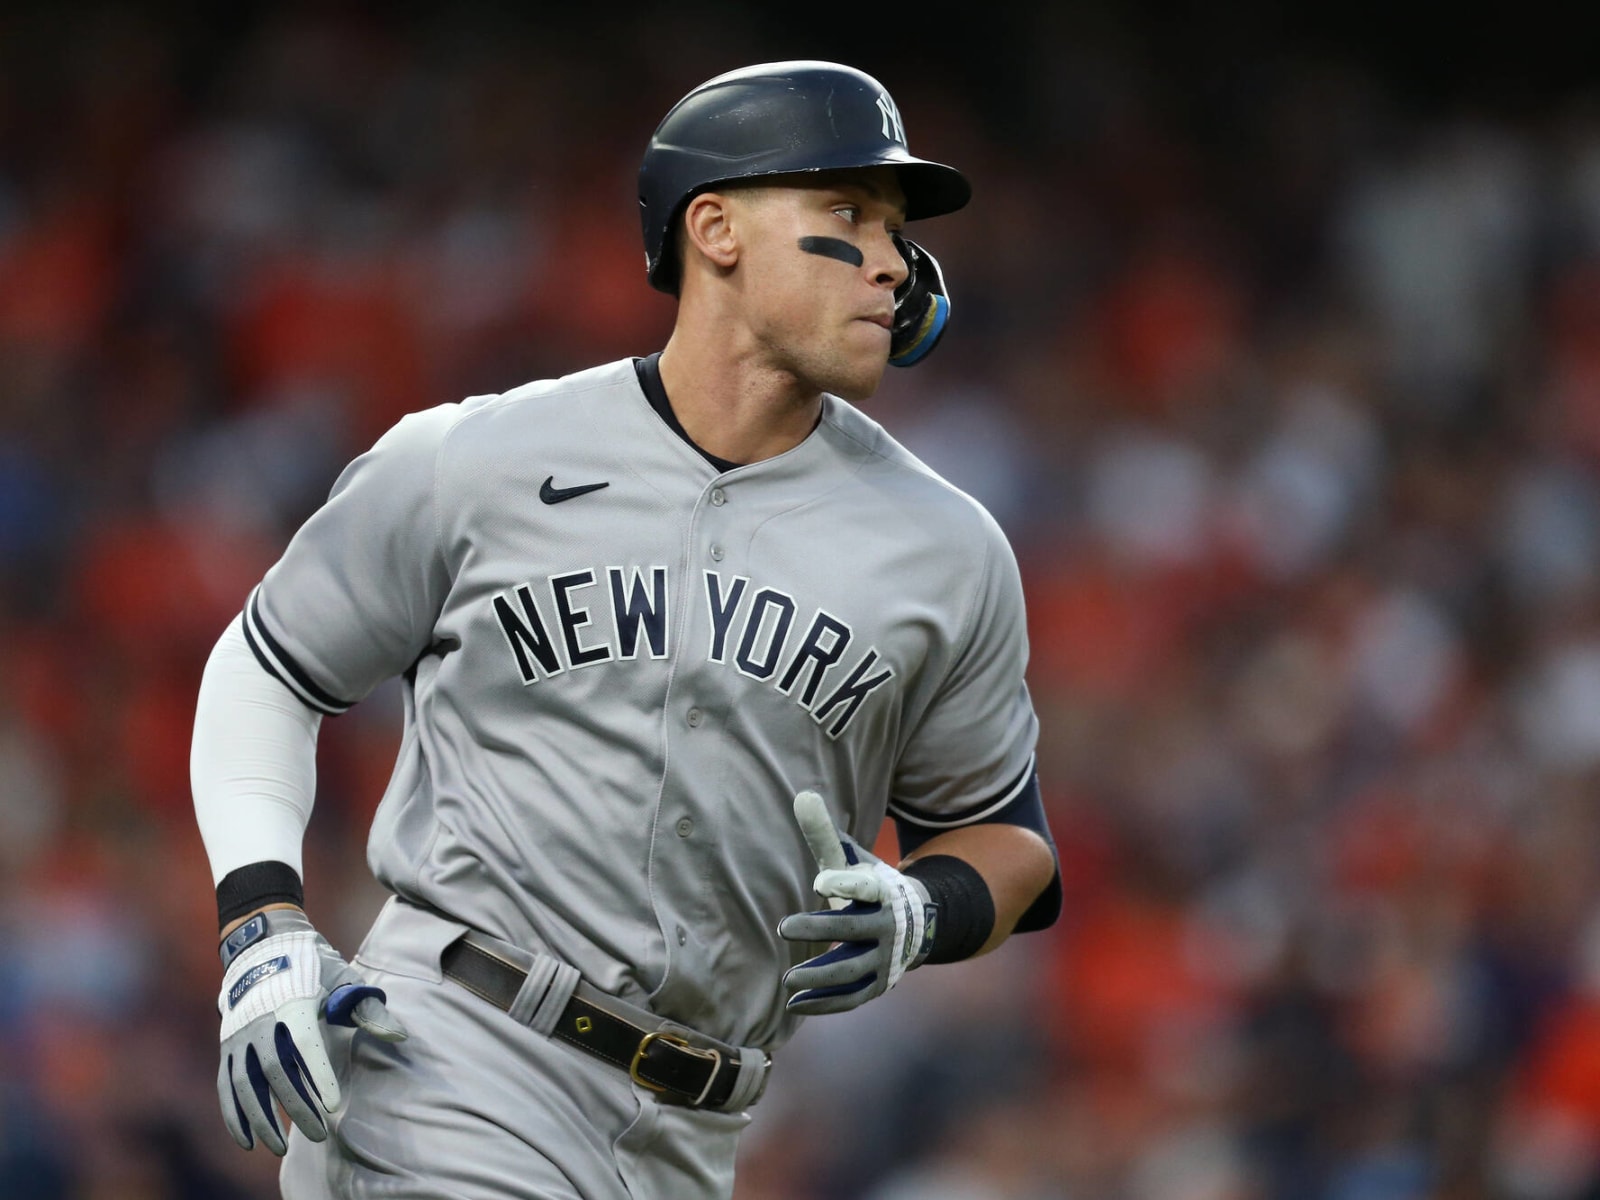 Aaron Judge New York Yankees Majestic Threads Softhand, 44% OFF